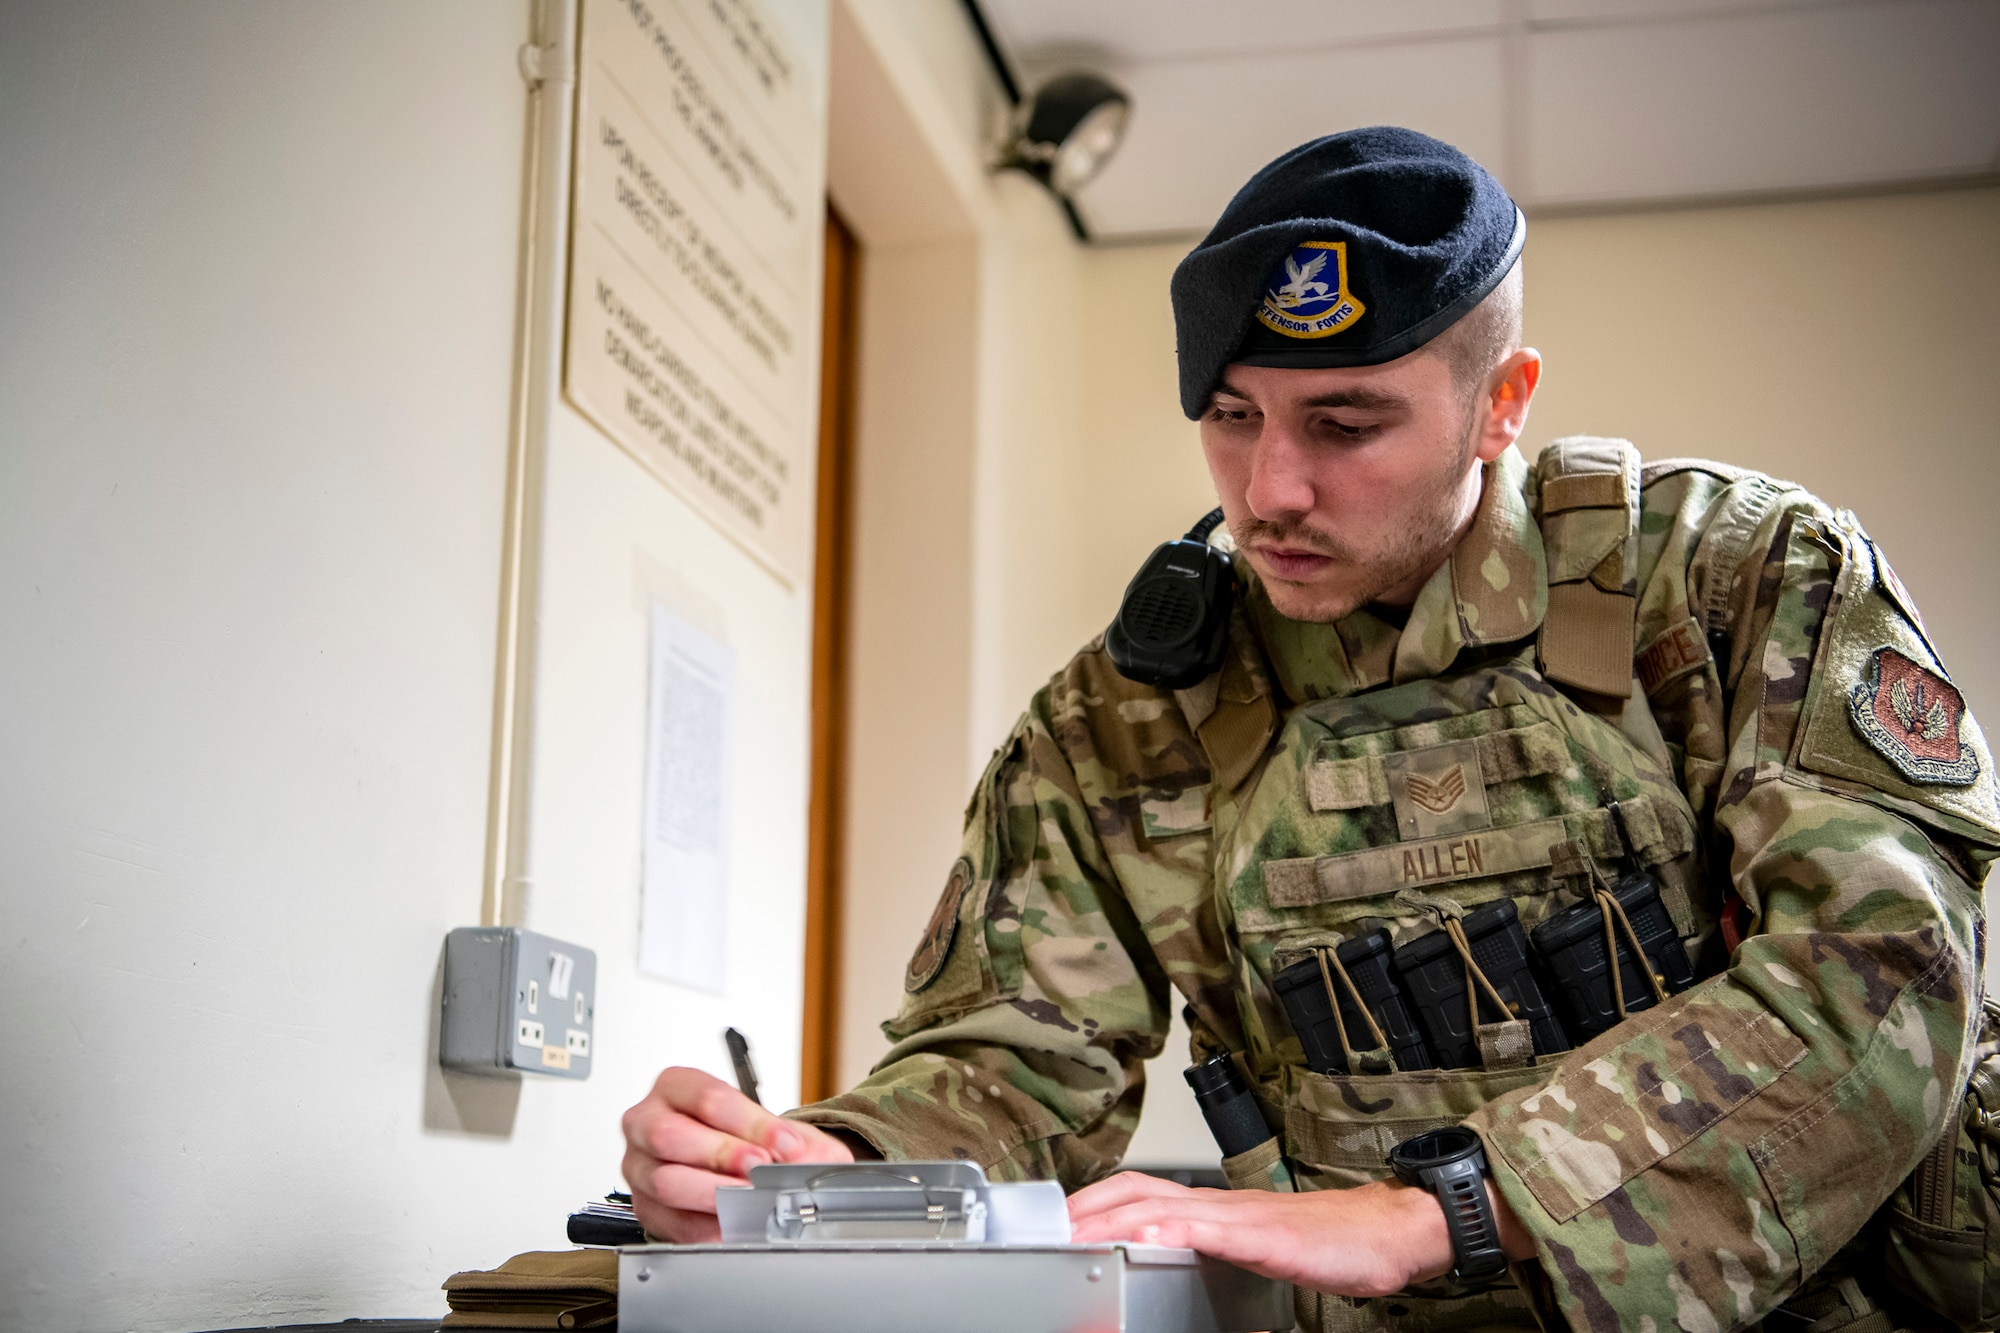 U.S. Air Force Staff Sgt. Elijah Allen, 423d Security Forces Squadron flight sergeant, writes notes during a field training exercise at RAF Molesworth, England, April 27, 2022. The exercise was designed to evaluate the strengths and weaknesses of 423d SFS members' response to various scenarios including domestic disturbances, drunk driving and other base security incidents. (U.S. Air Force photo by Staff Sgt. Eugene Oliver)